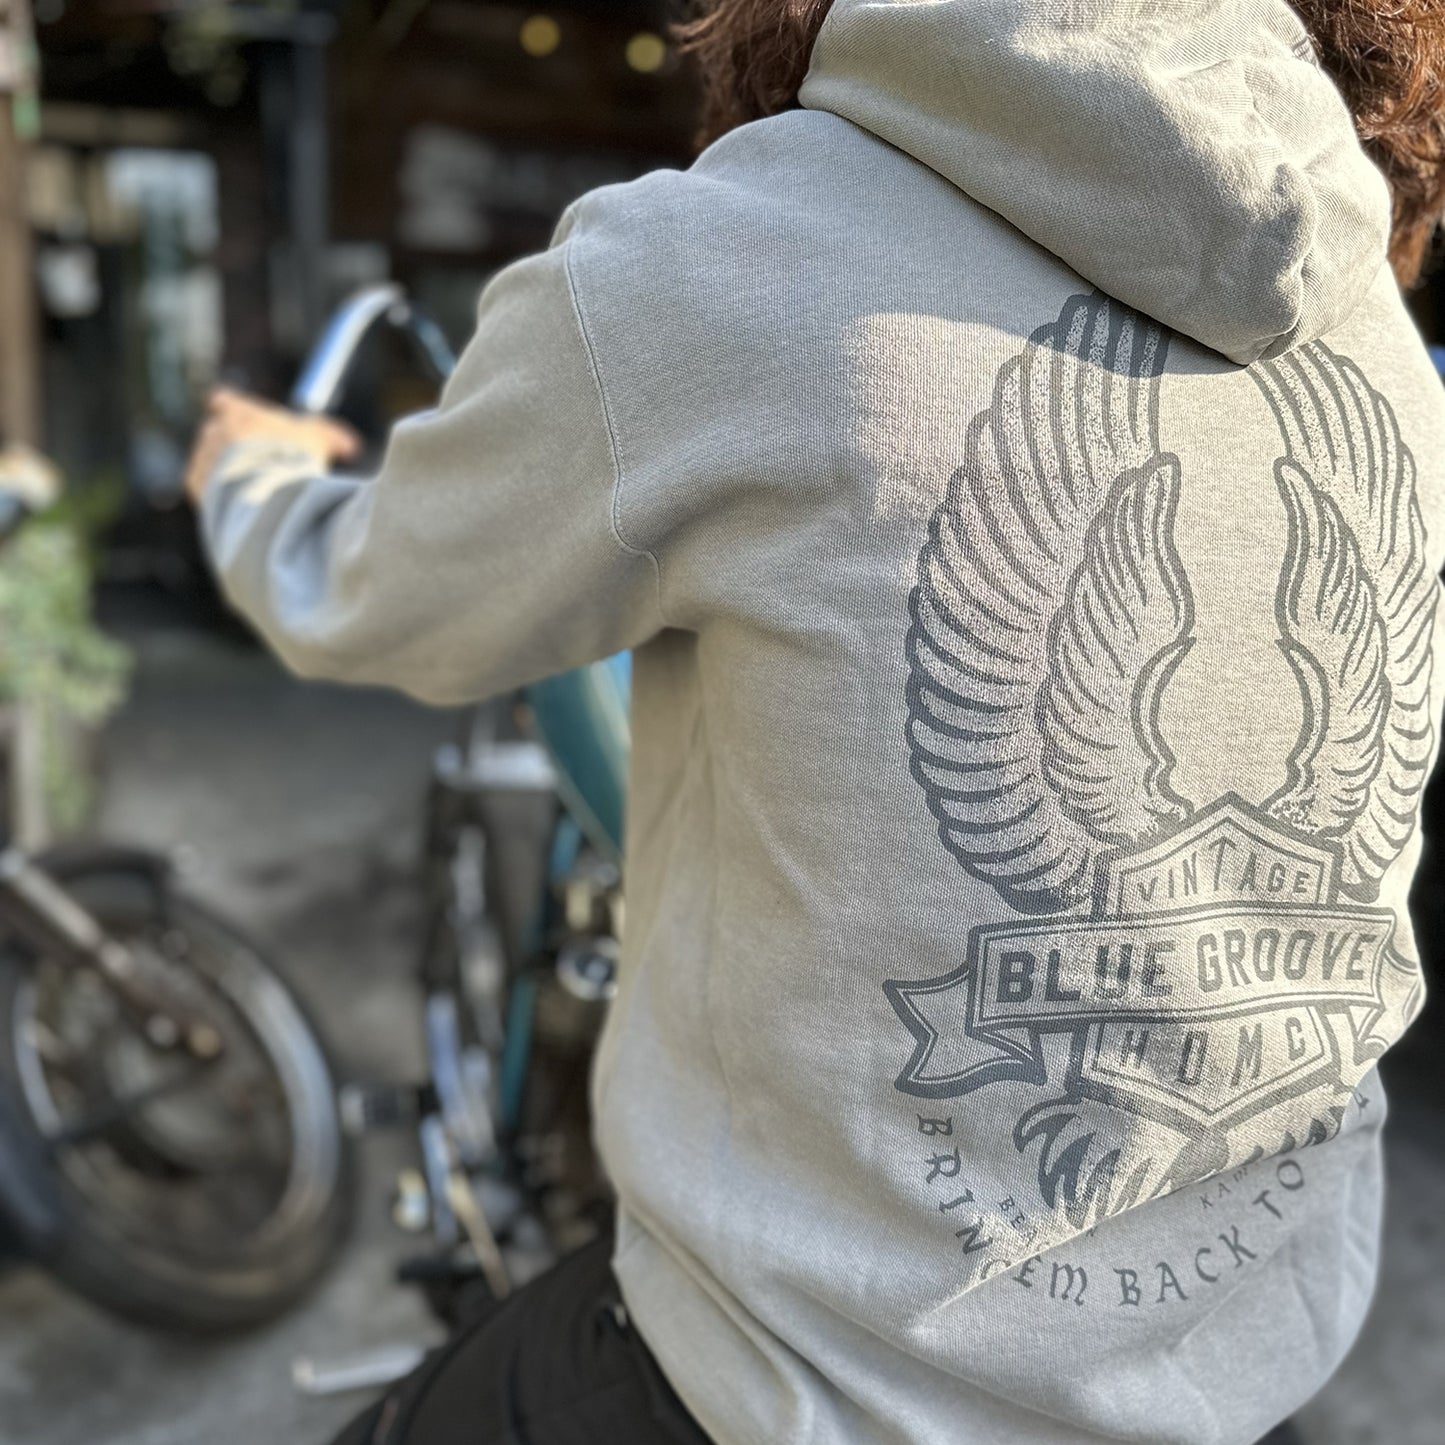 “BRING ‘EM BACK TO LIFE” PULL-OVER HOODIE - WORN GRAY